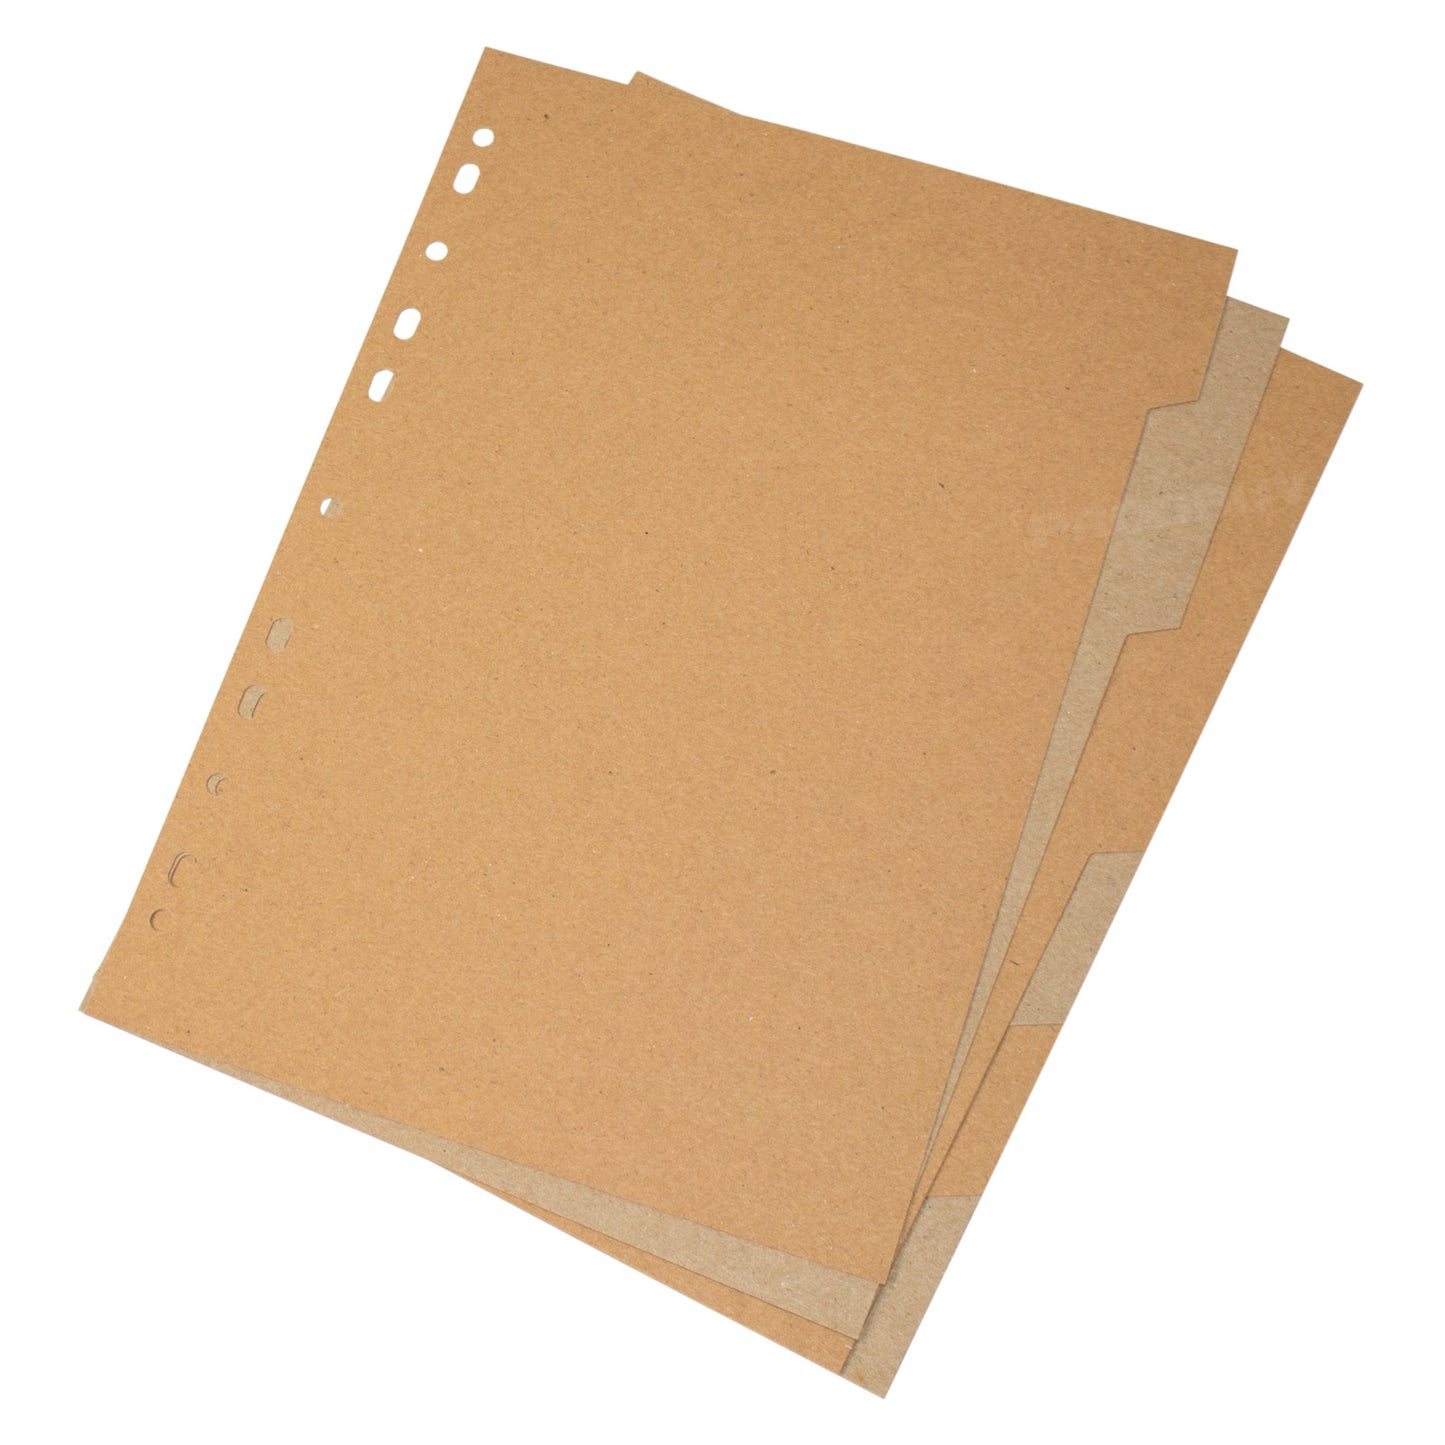 Set of 10 Paperwork Index Subject Dividers 6 Part A4 with Buff Brown Kraft Card